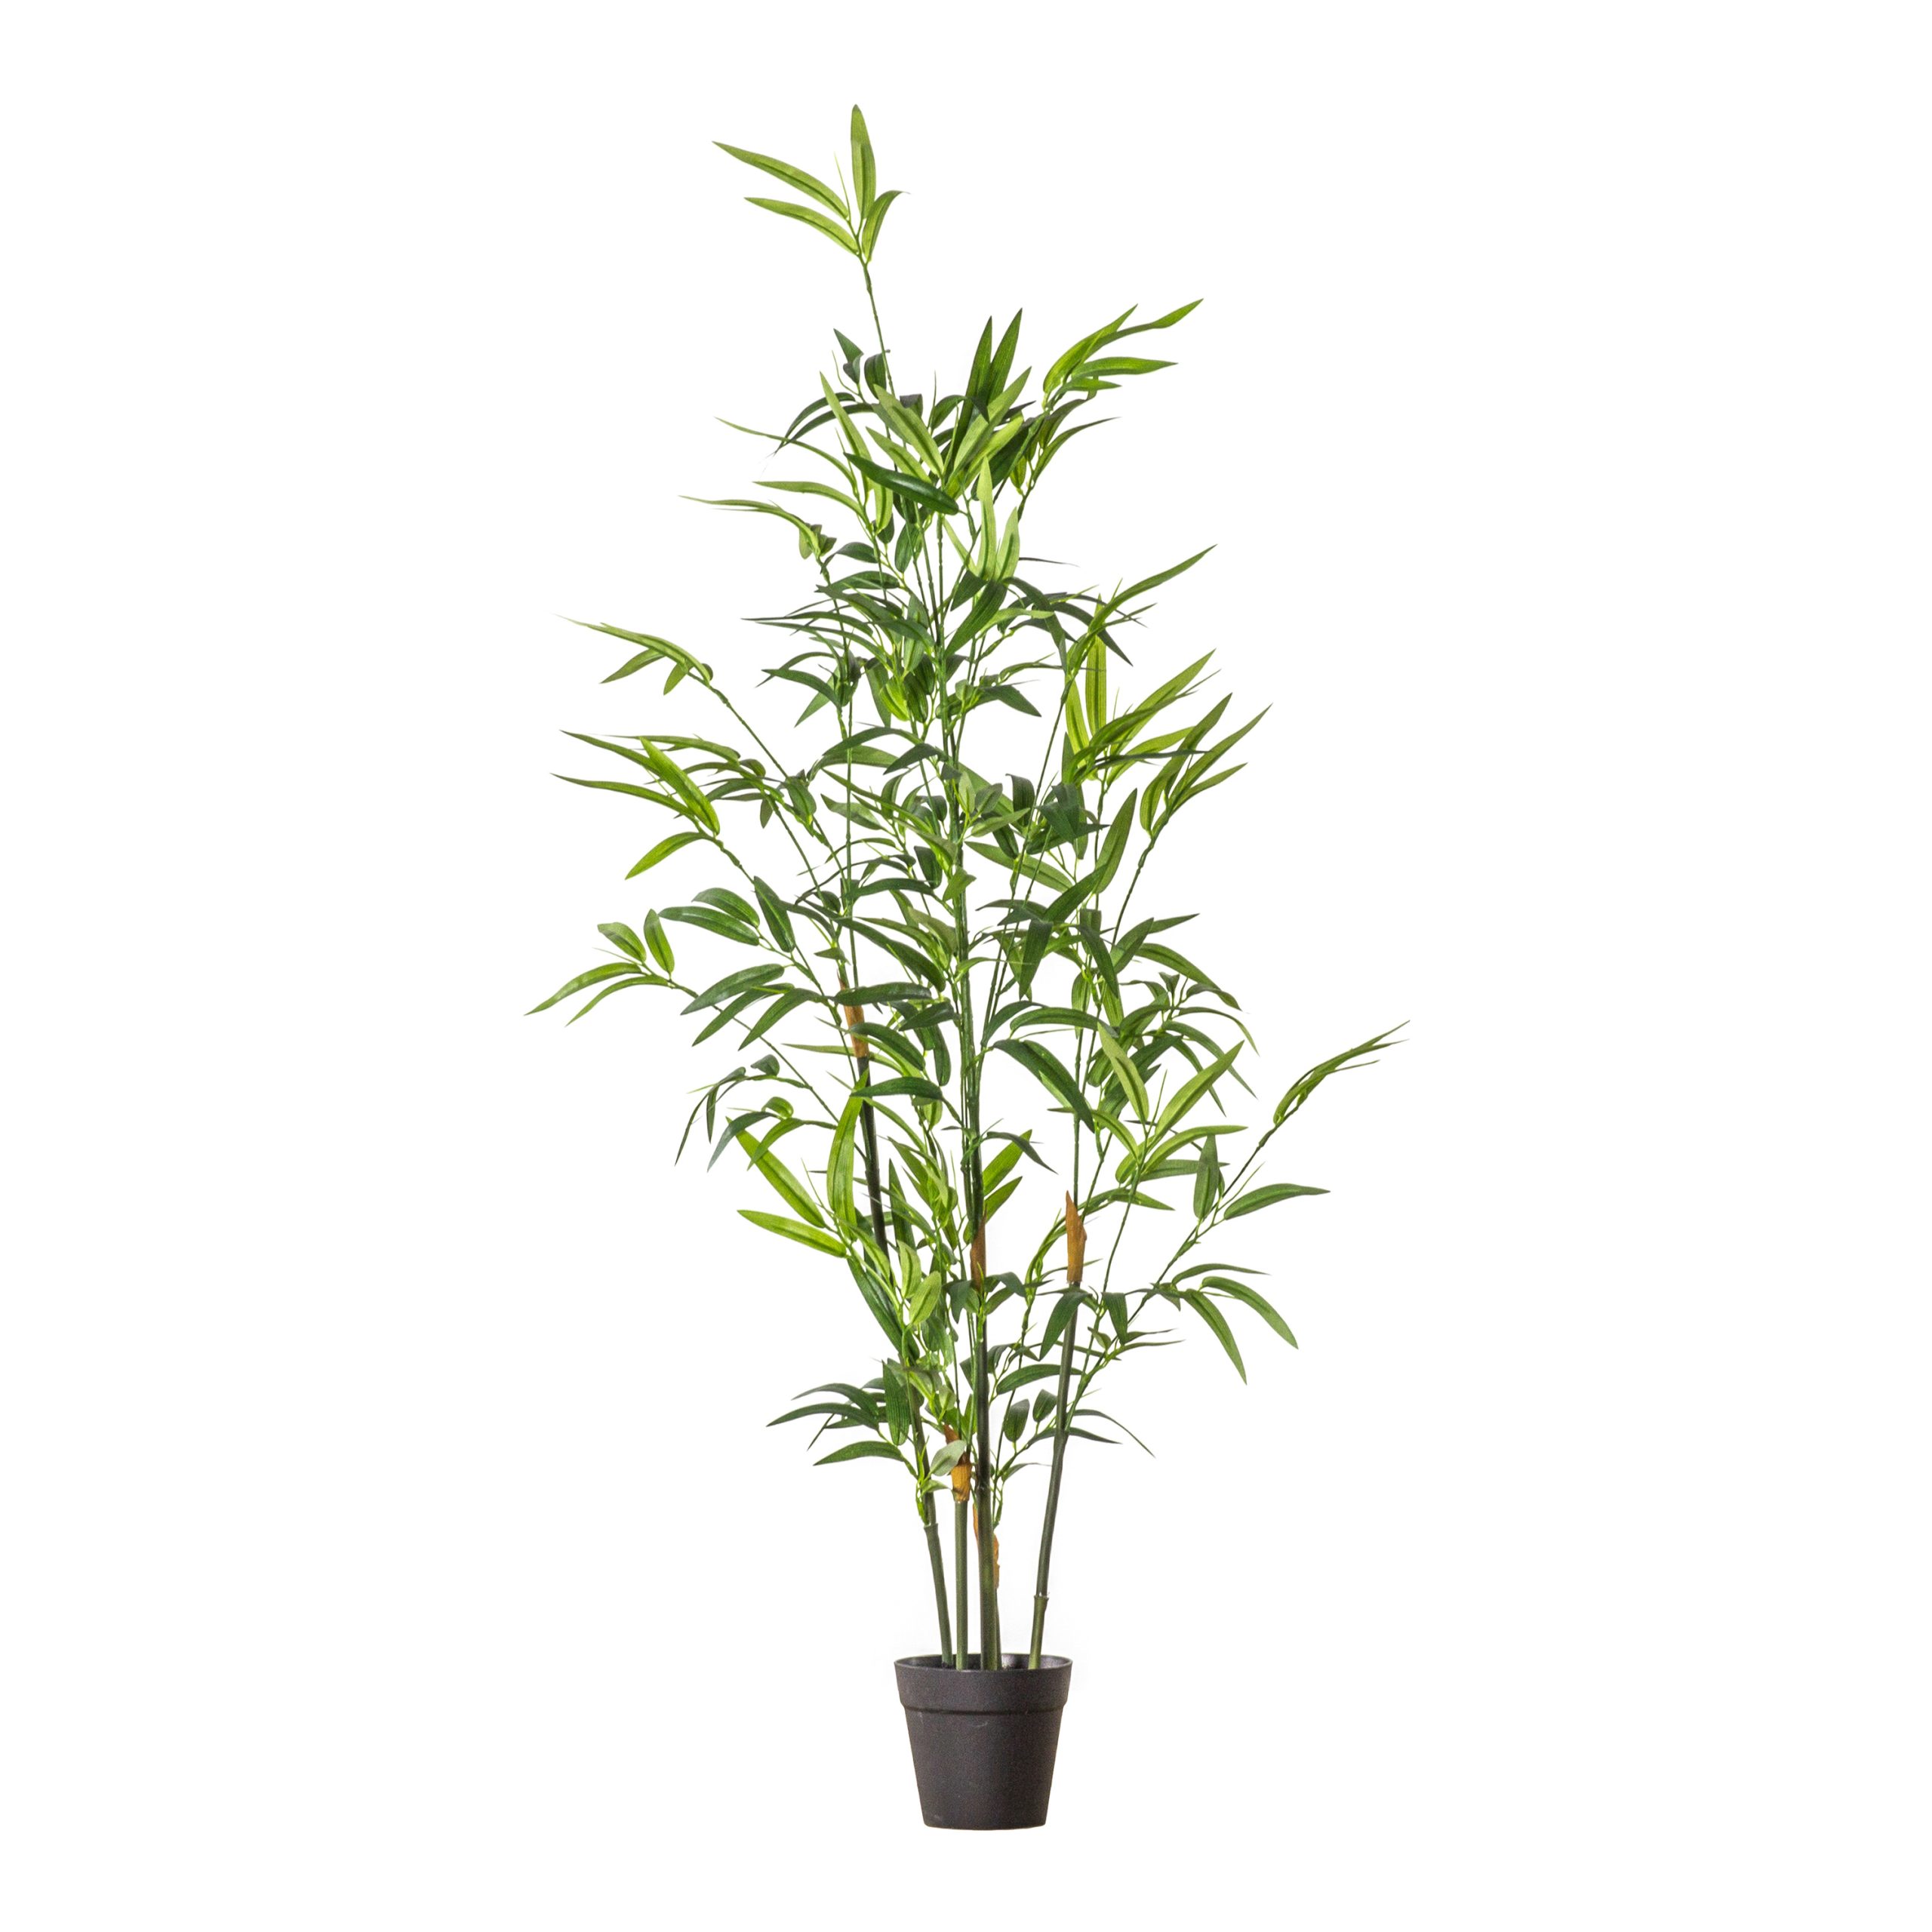 Gallery Direct Bamboo w/ Leaves